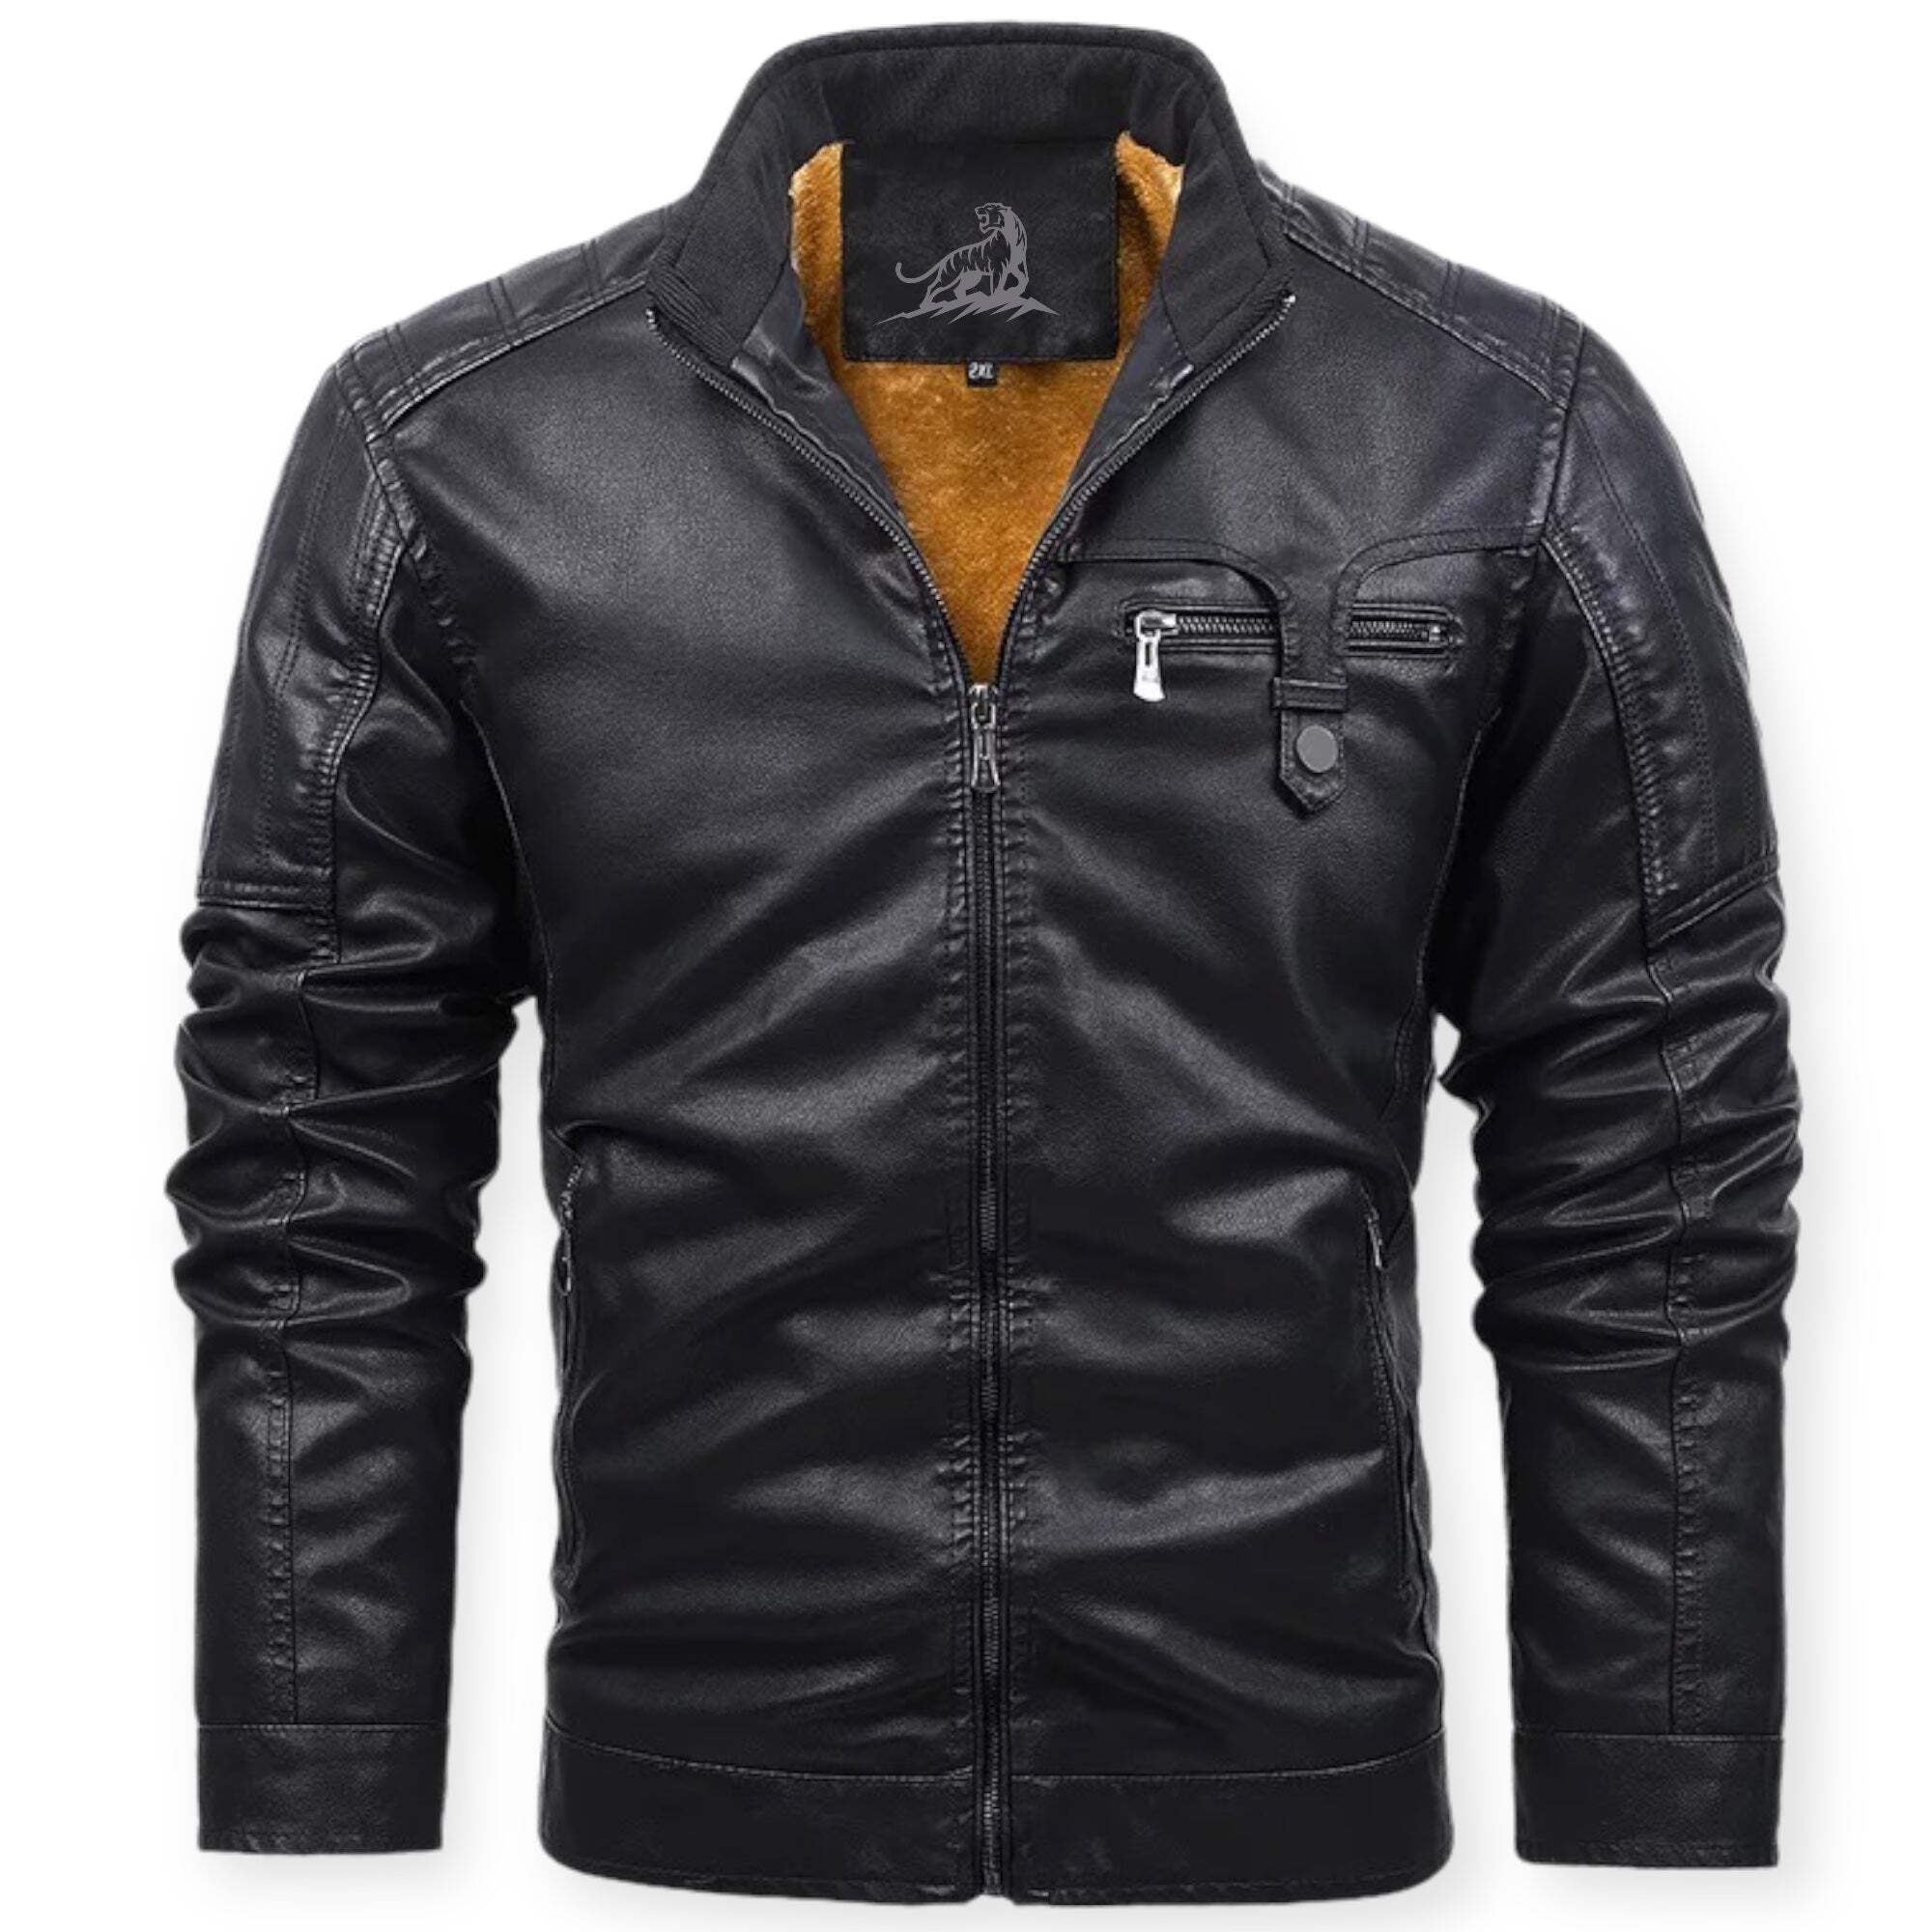 'Stealth' Leather Jacket